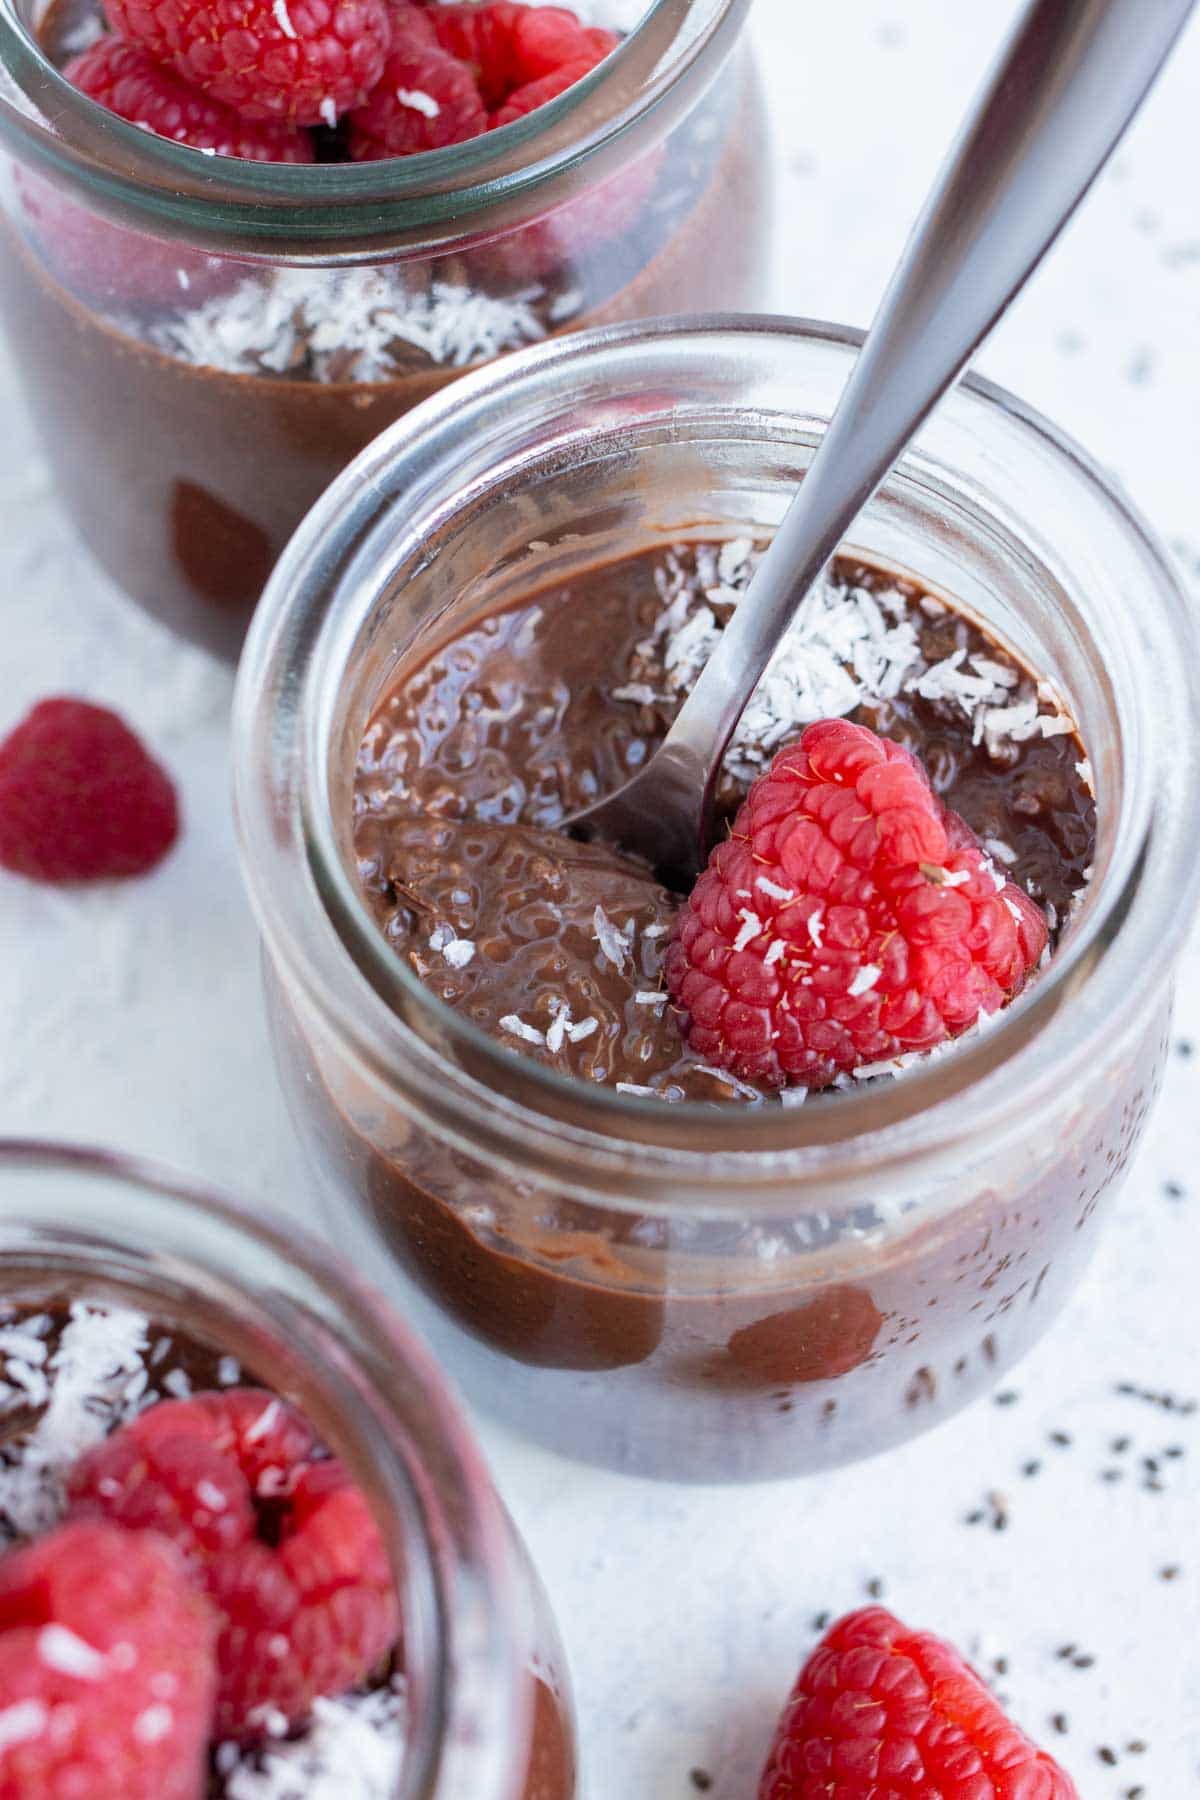 Chocolate chia seed pudding is topped with raspberries and shredded coconut.